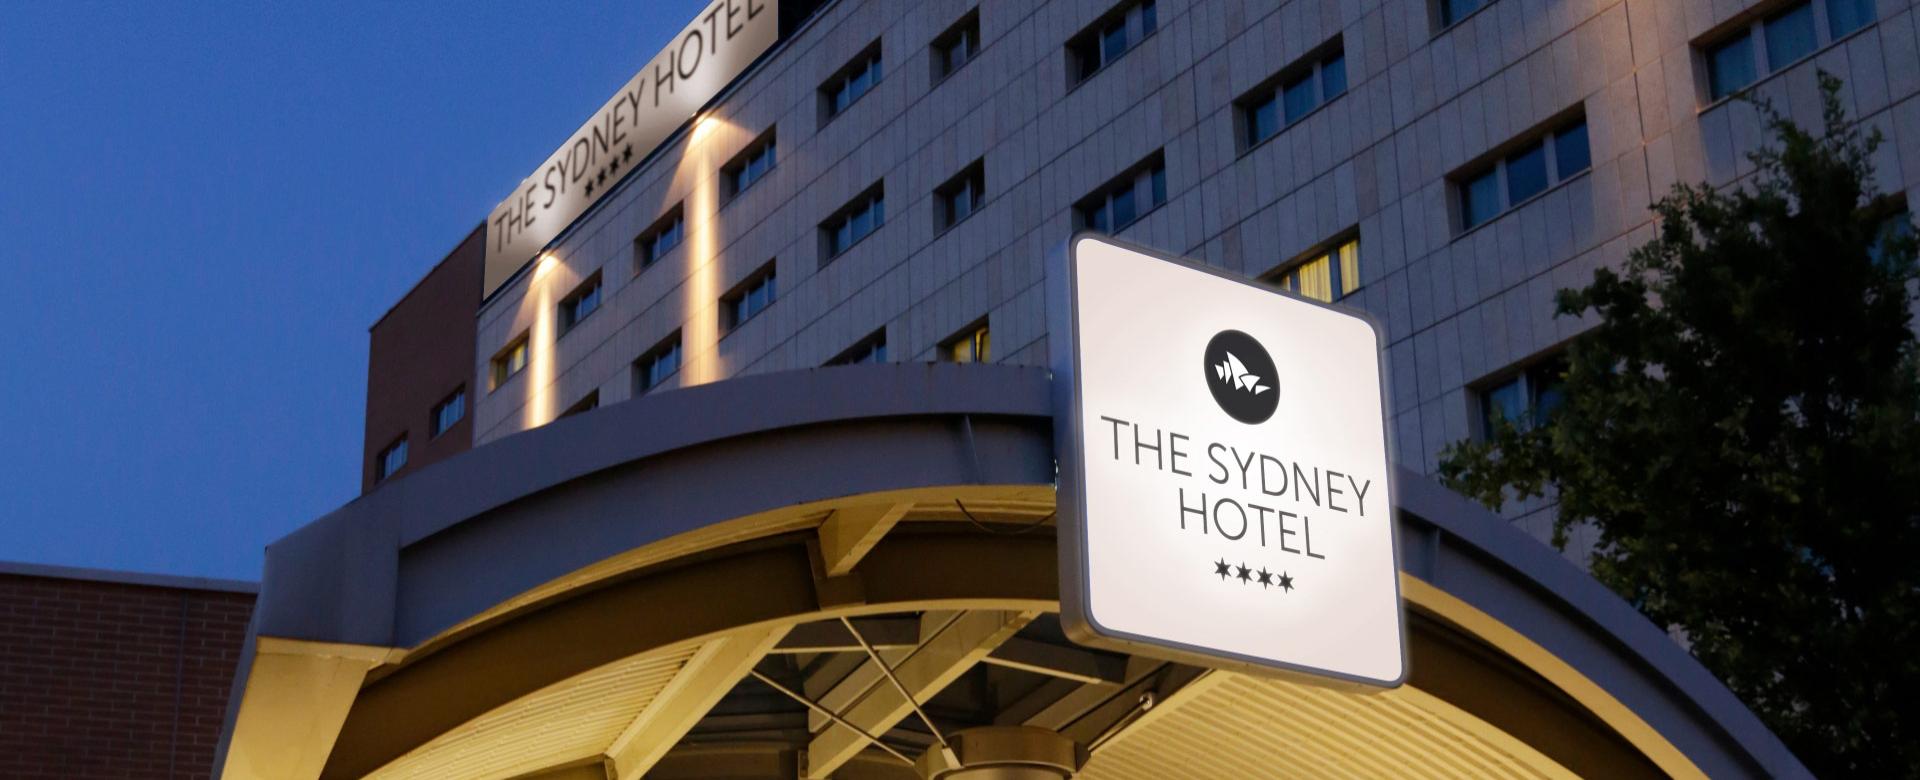 thesydneyhotel en contacts 006